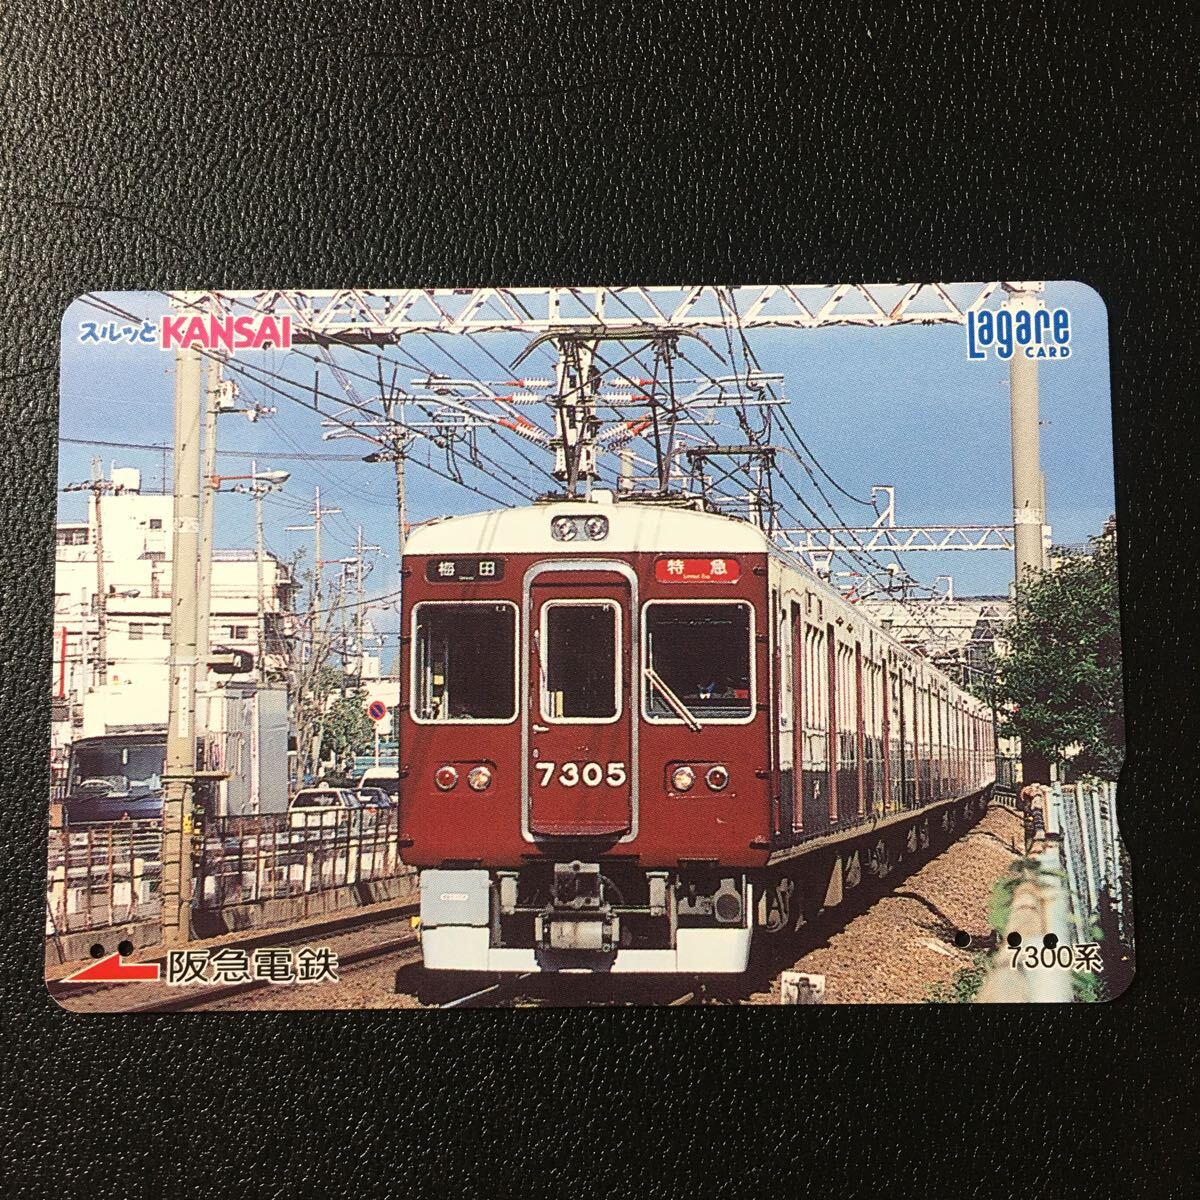 2002 year 11 month 25 day sale pattern -[7300 series ]-. sudden la girl card ( used Surutto KANSAI)